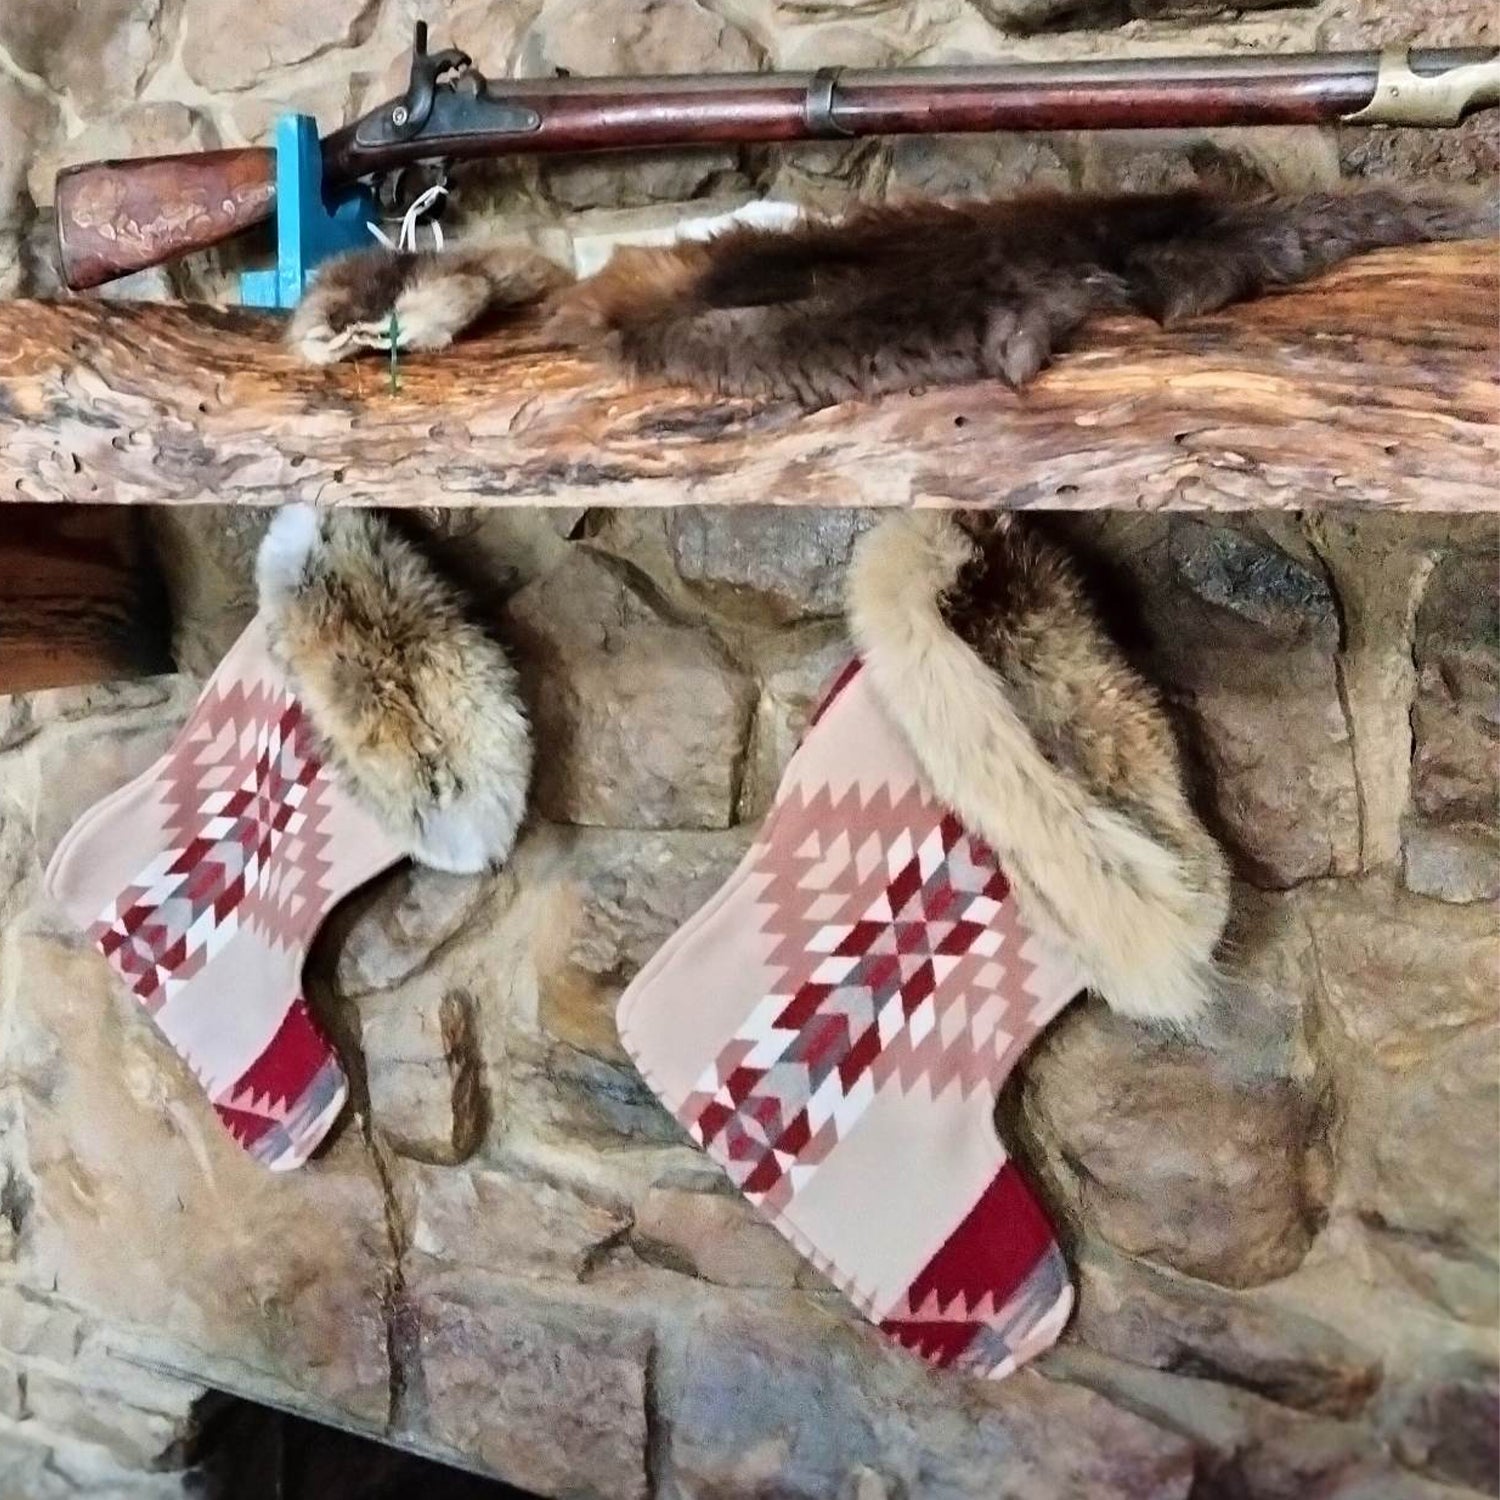 12 Days of Christmas - Fur trimmed Holiday Stockings